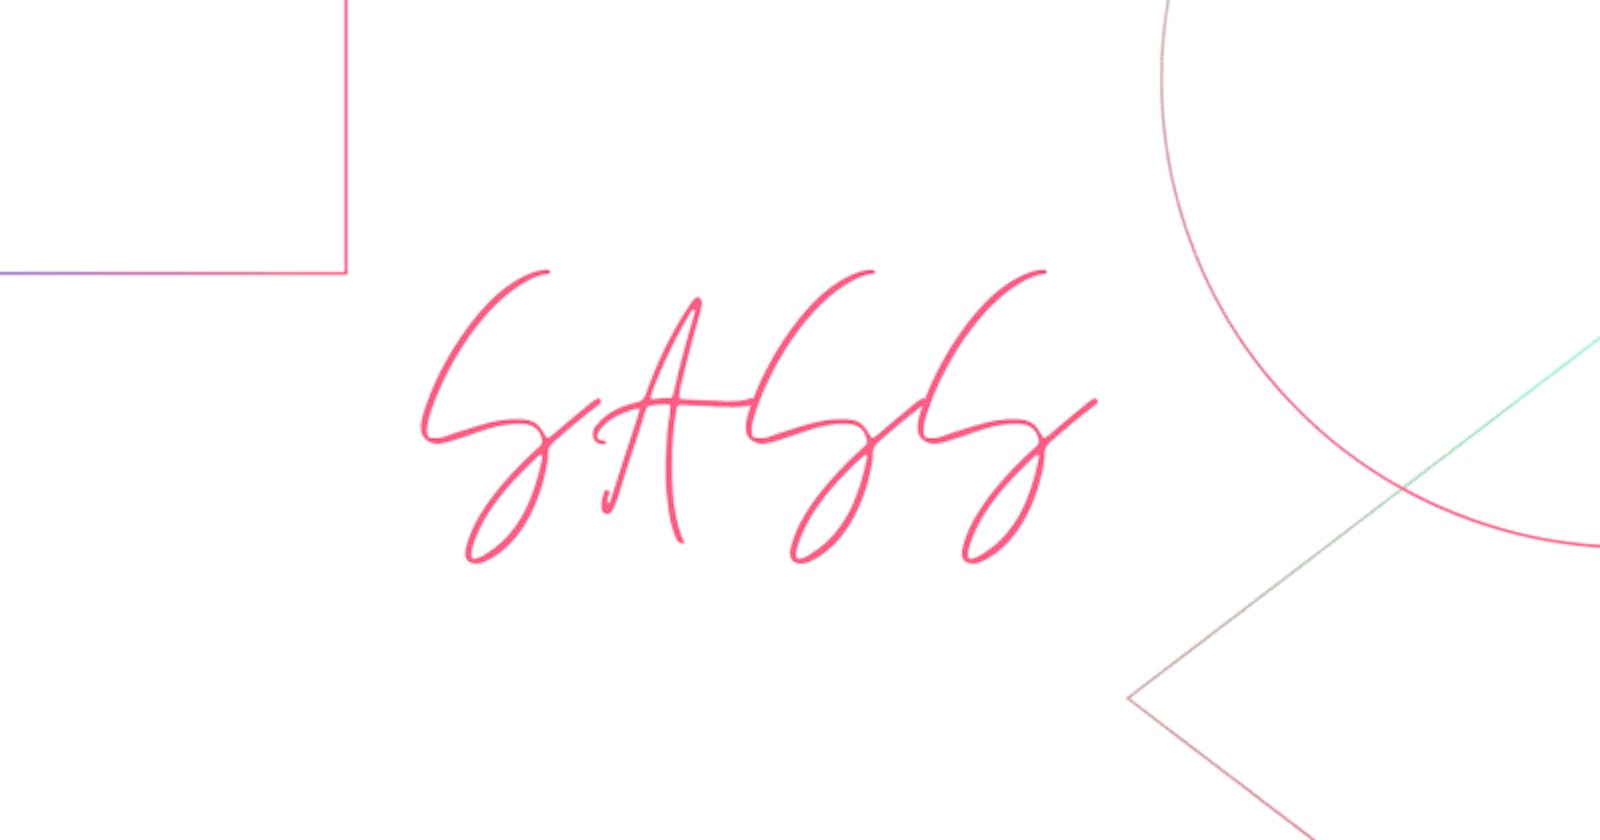 How to setup sass in your project